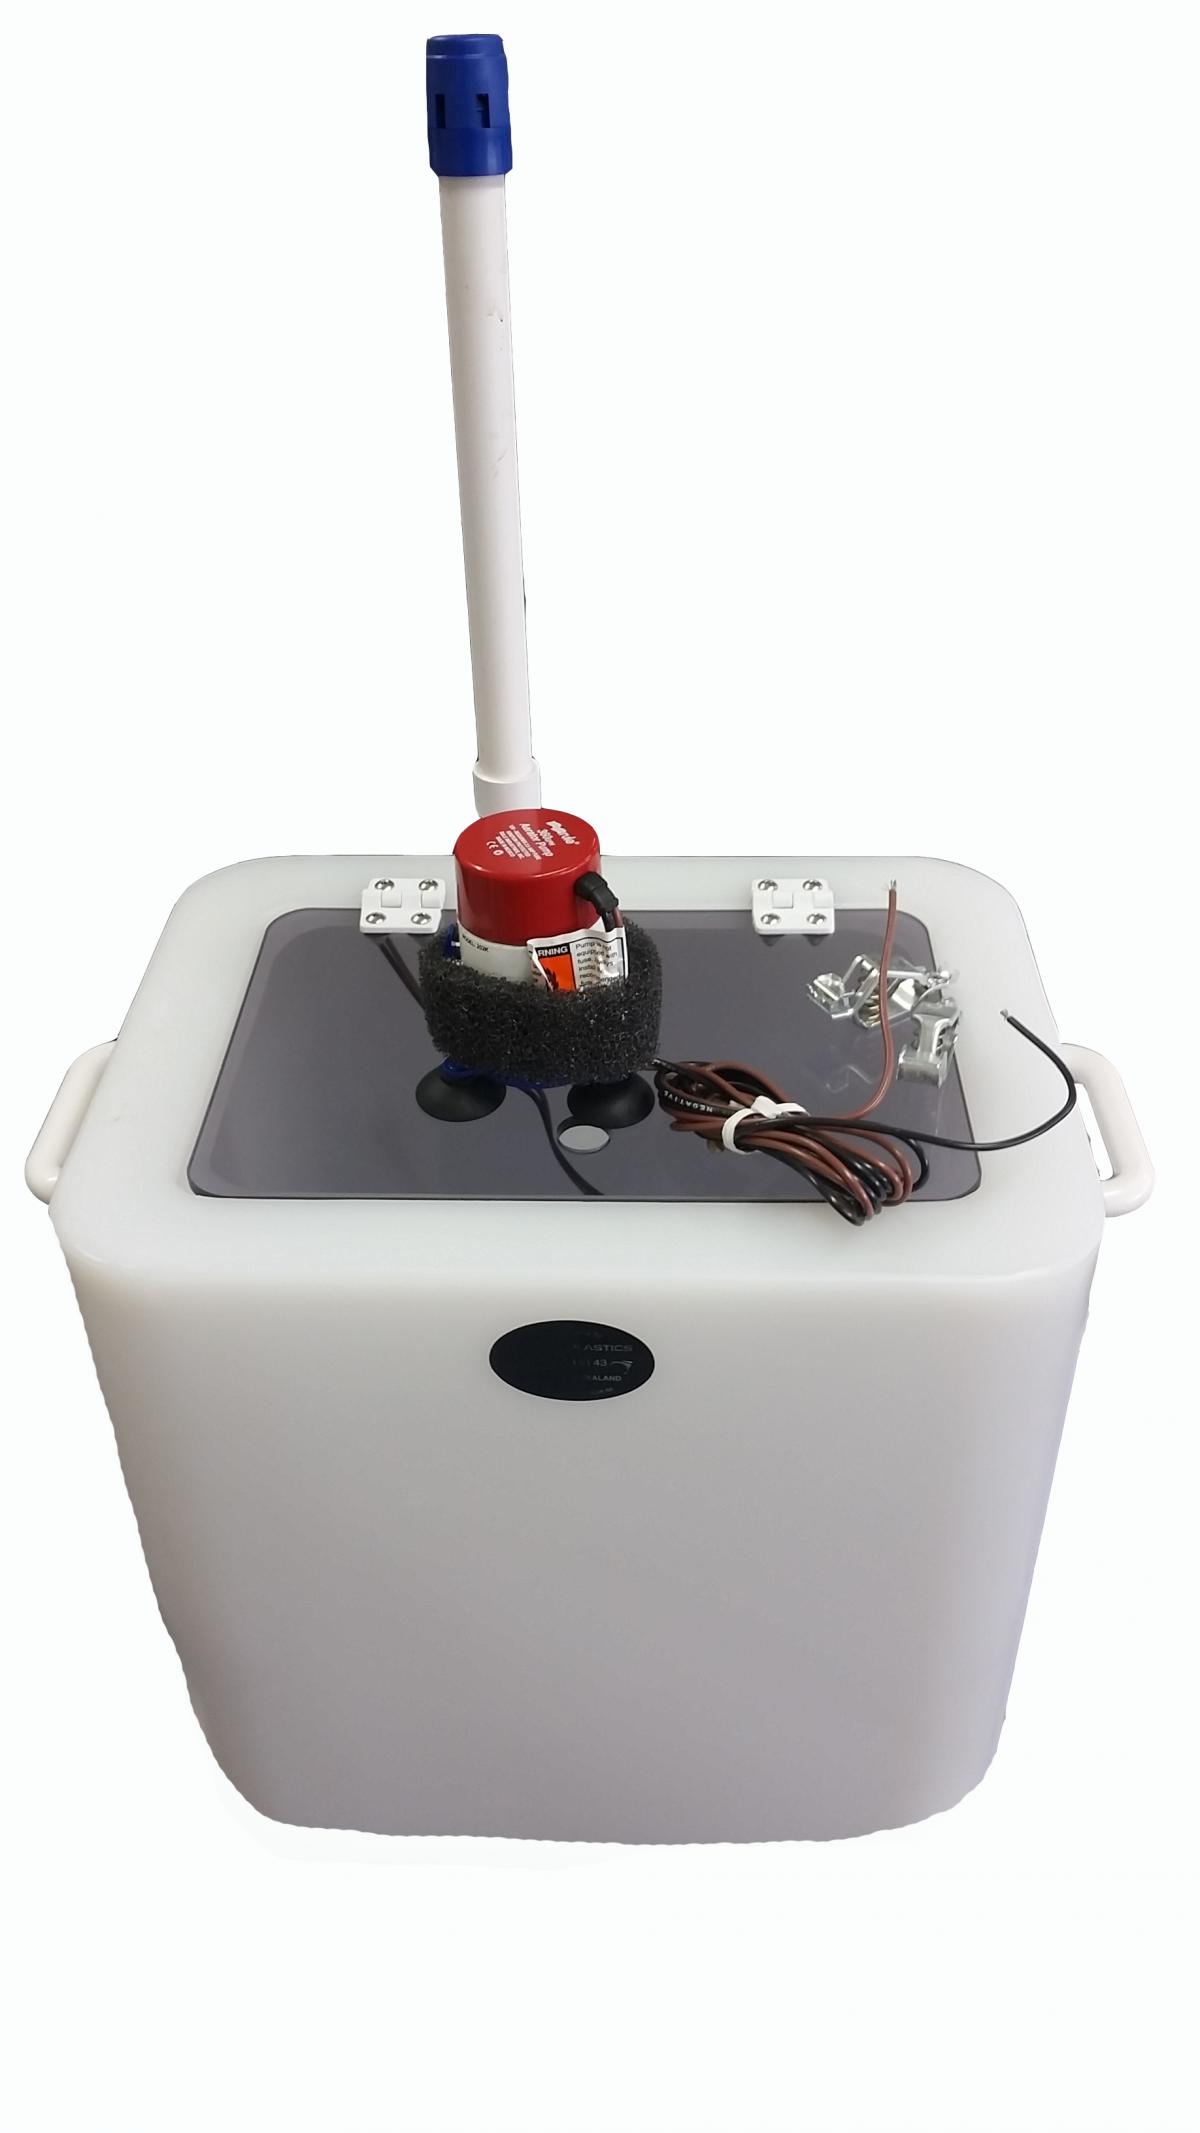 Live Bait Tanks 30Ltr - Your local for Marine chandlery and expert advice.